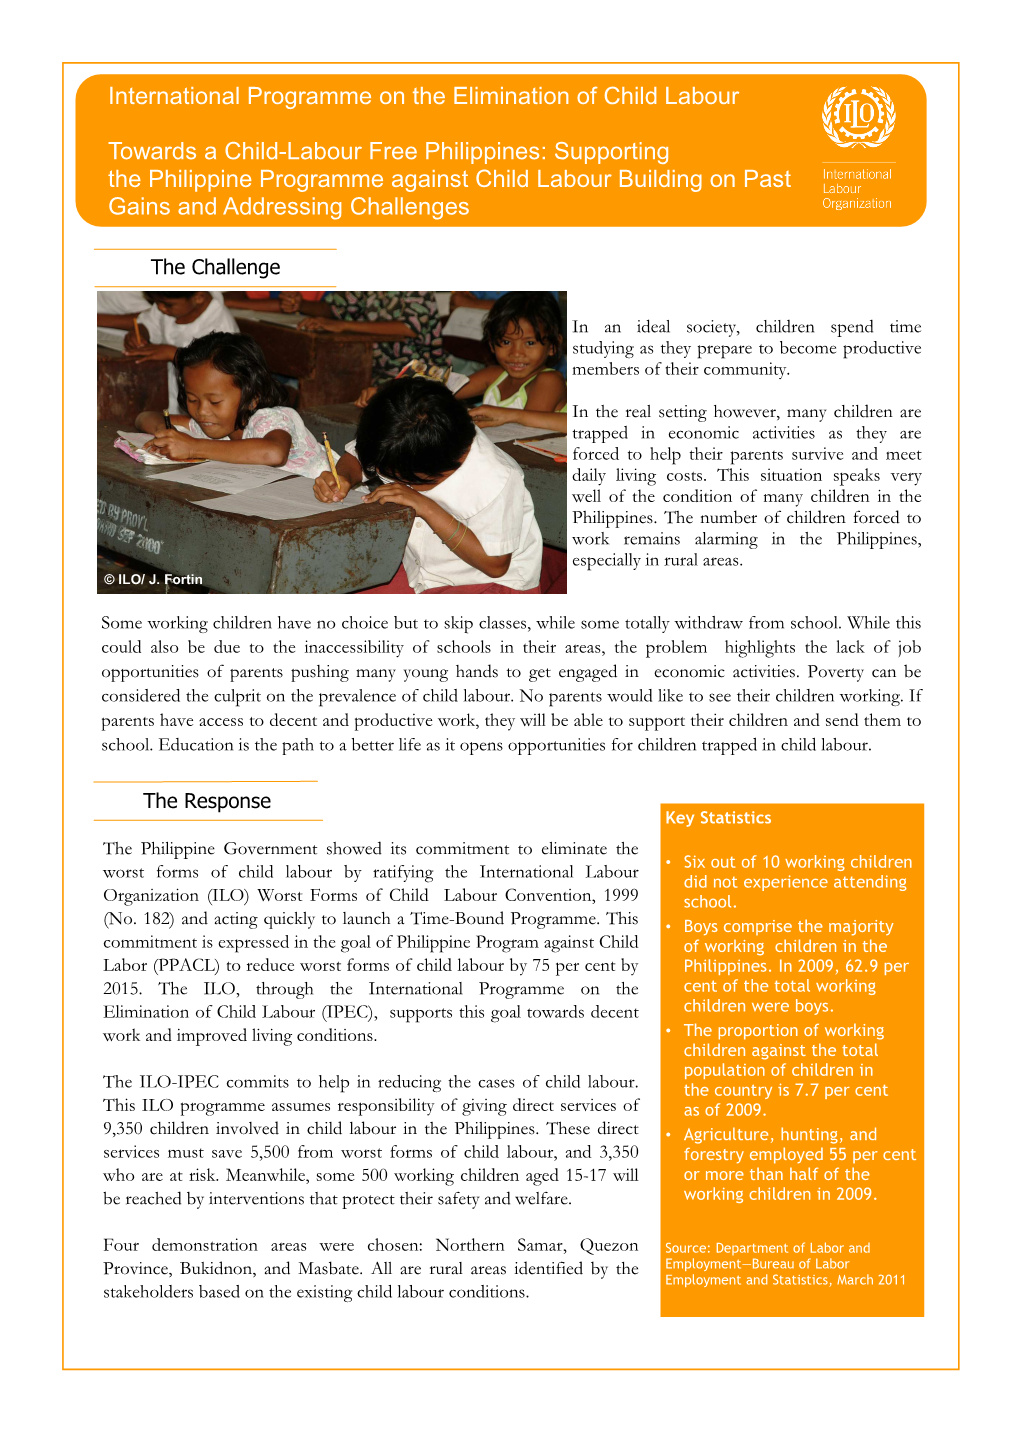 International Programme on the Elimination of Child Labour